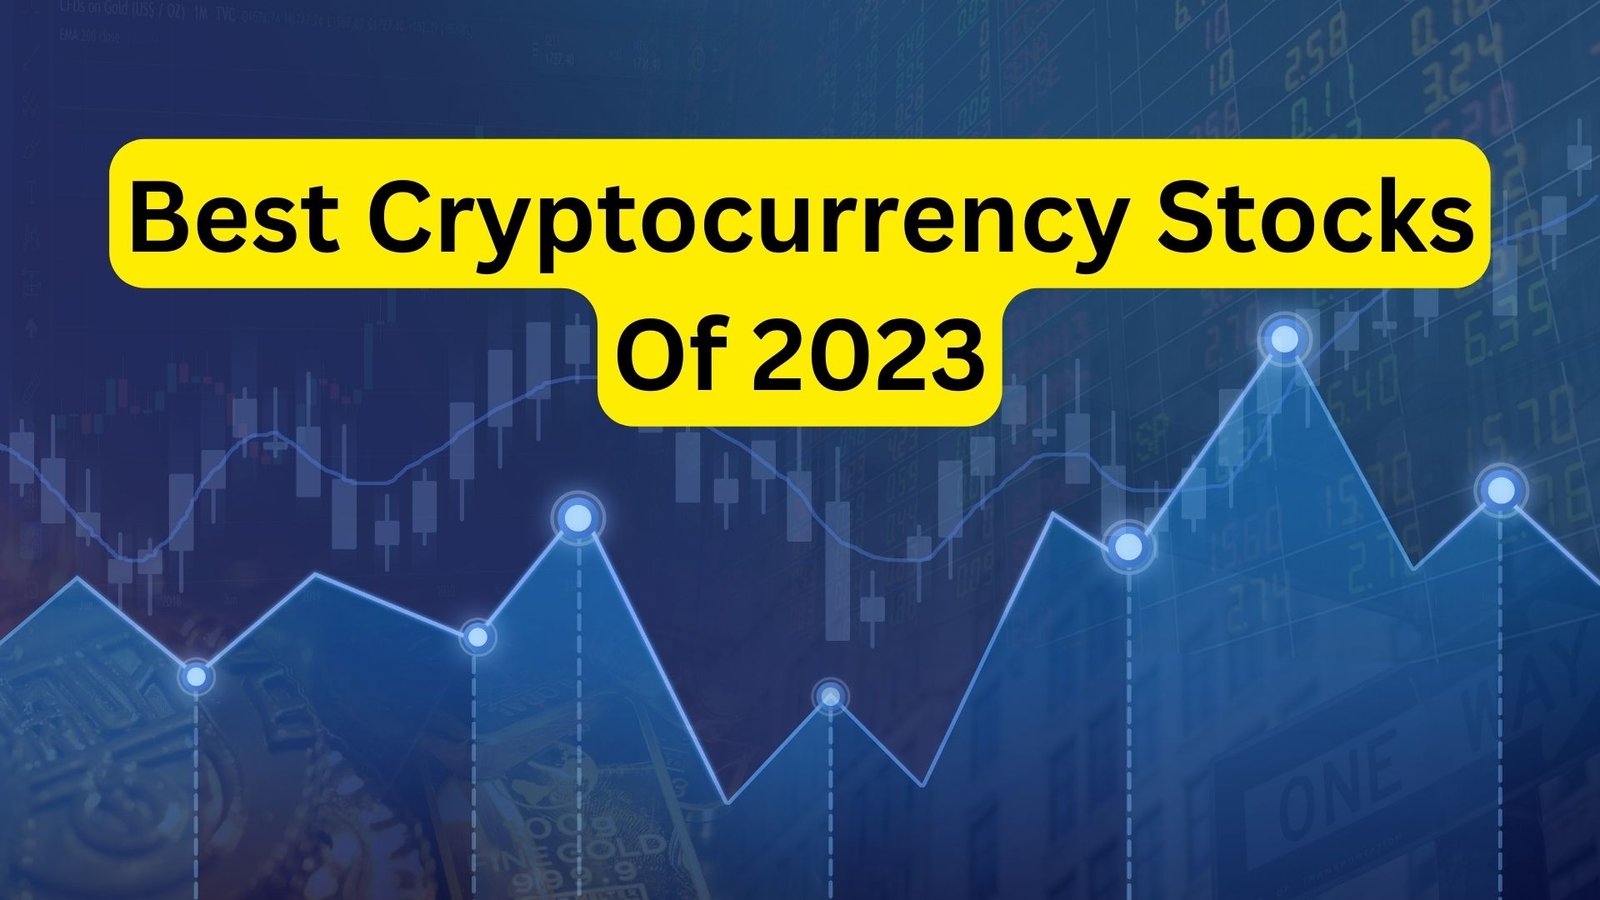 Best Cryptocurrency Stocks Of 2023